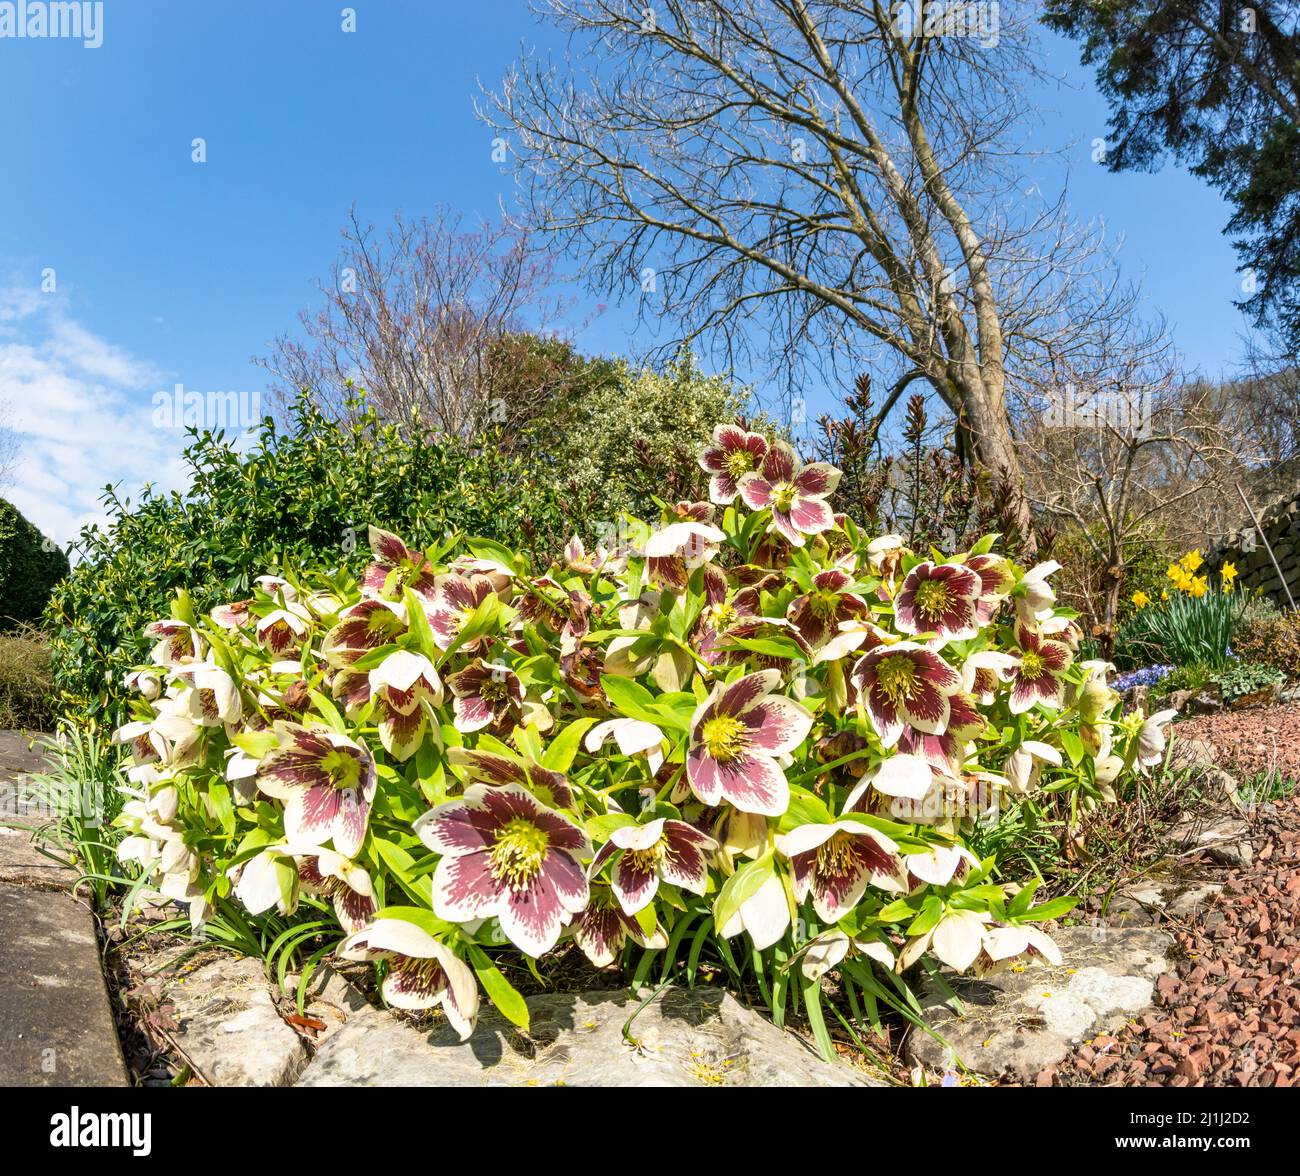 Garden Hellebore wide angle view Stock Photo